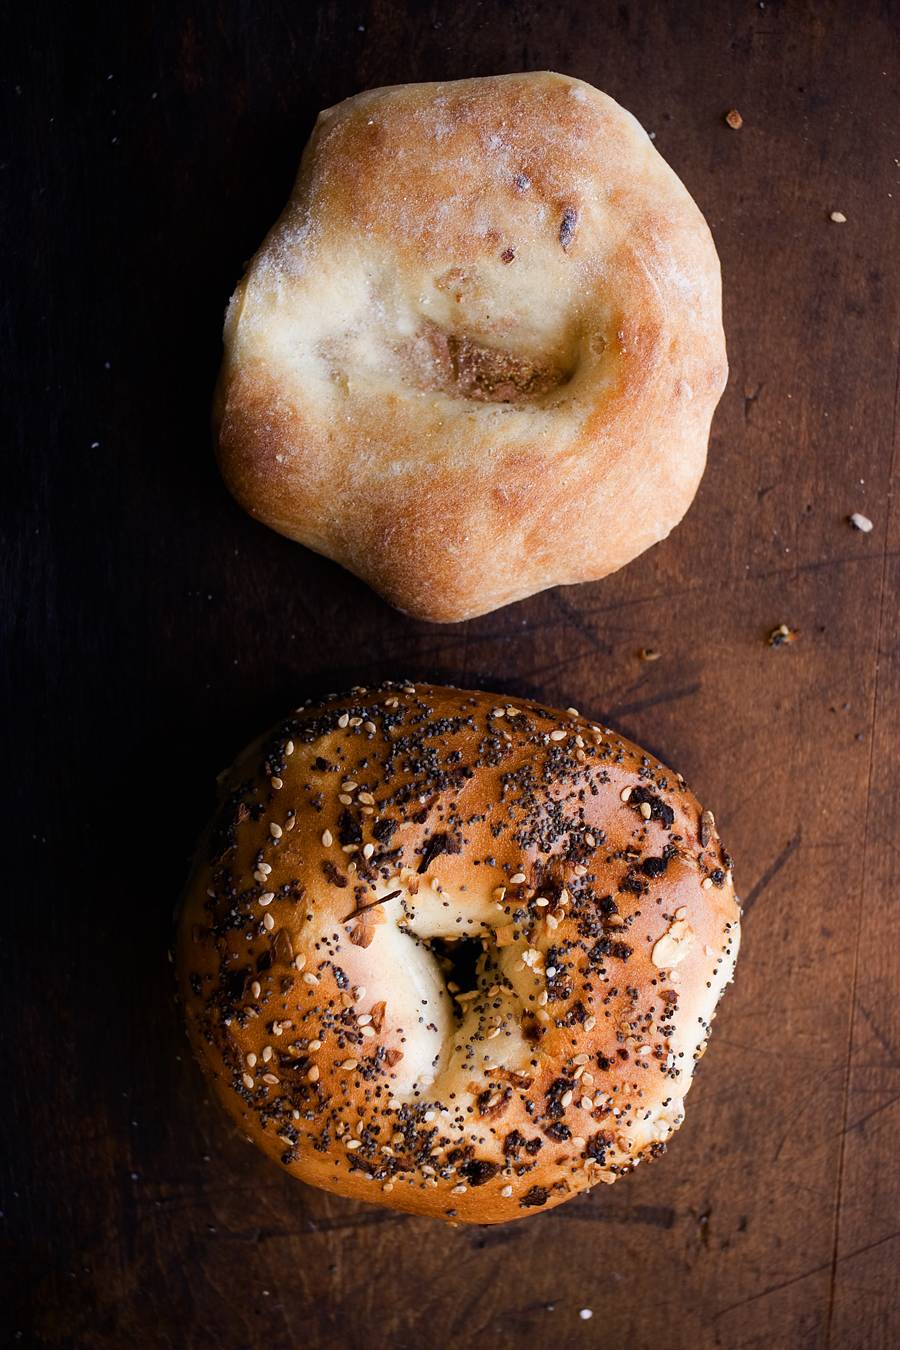 Russ & Daughters at the Jewish Museum | bakery | 1109 5th Ave, New York, NY 10128, USA | 21247548803 OR +1 212-475-4880 ext. 3